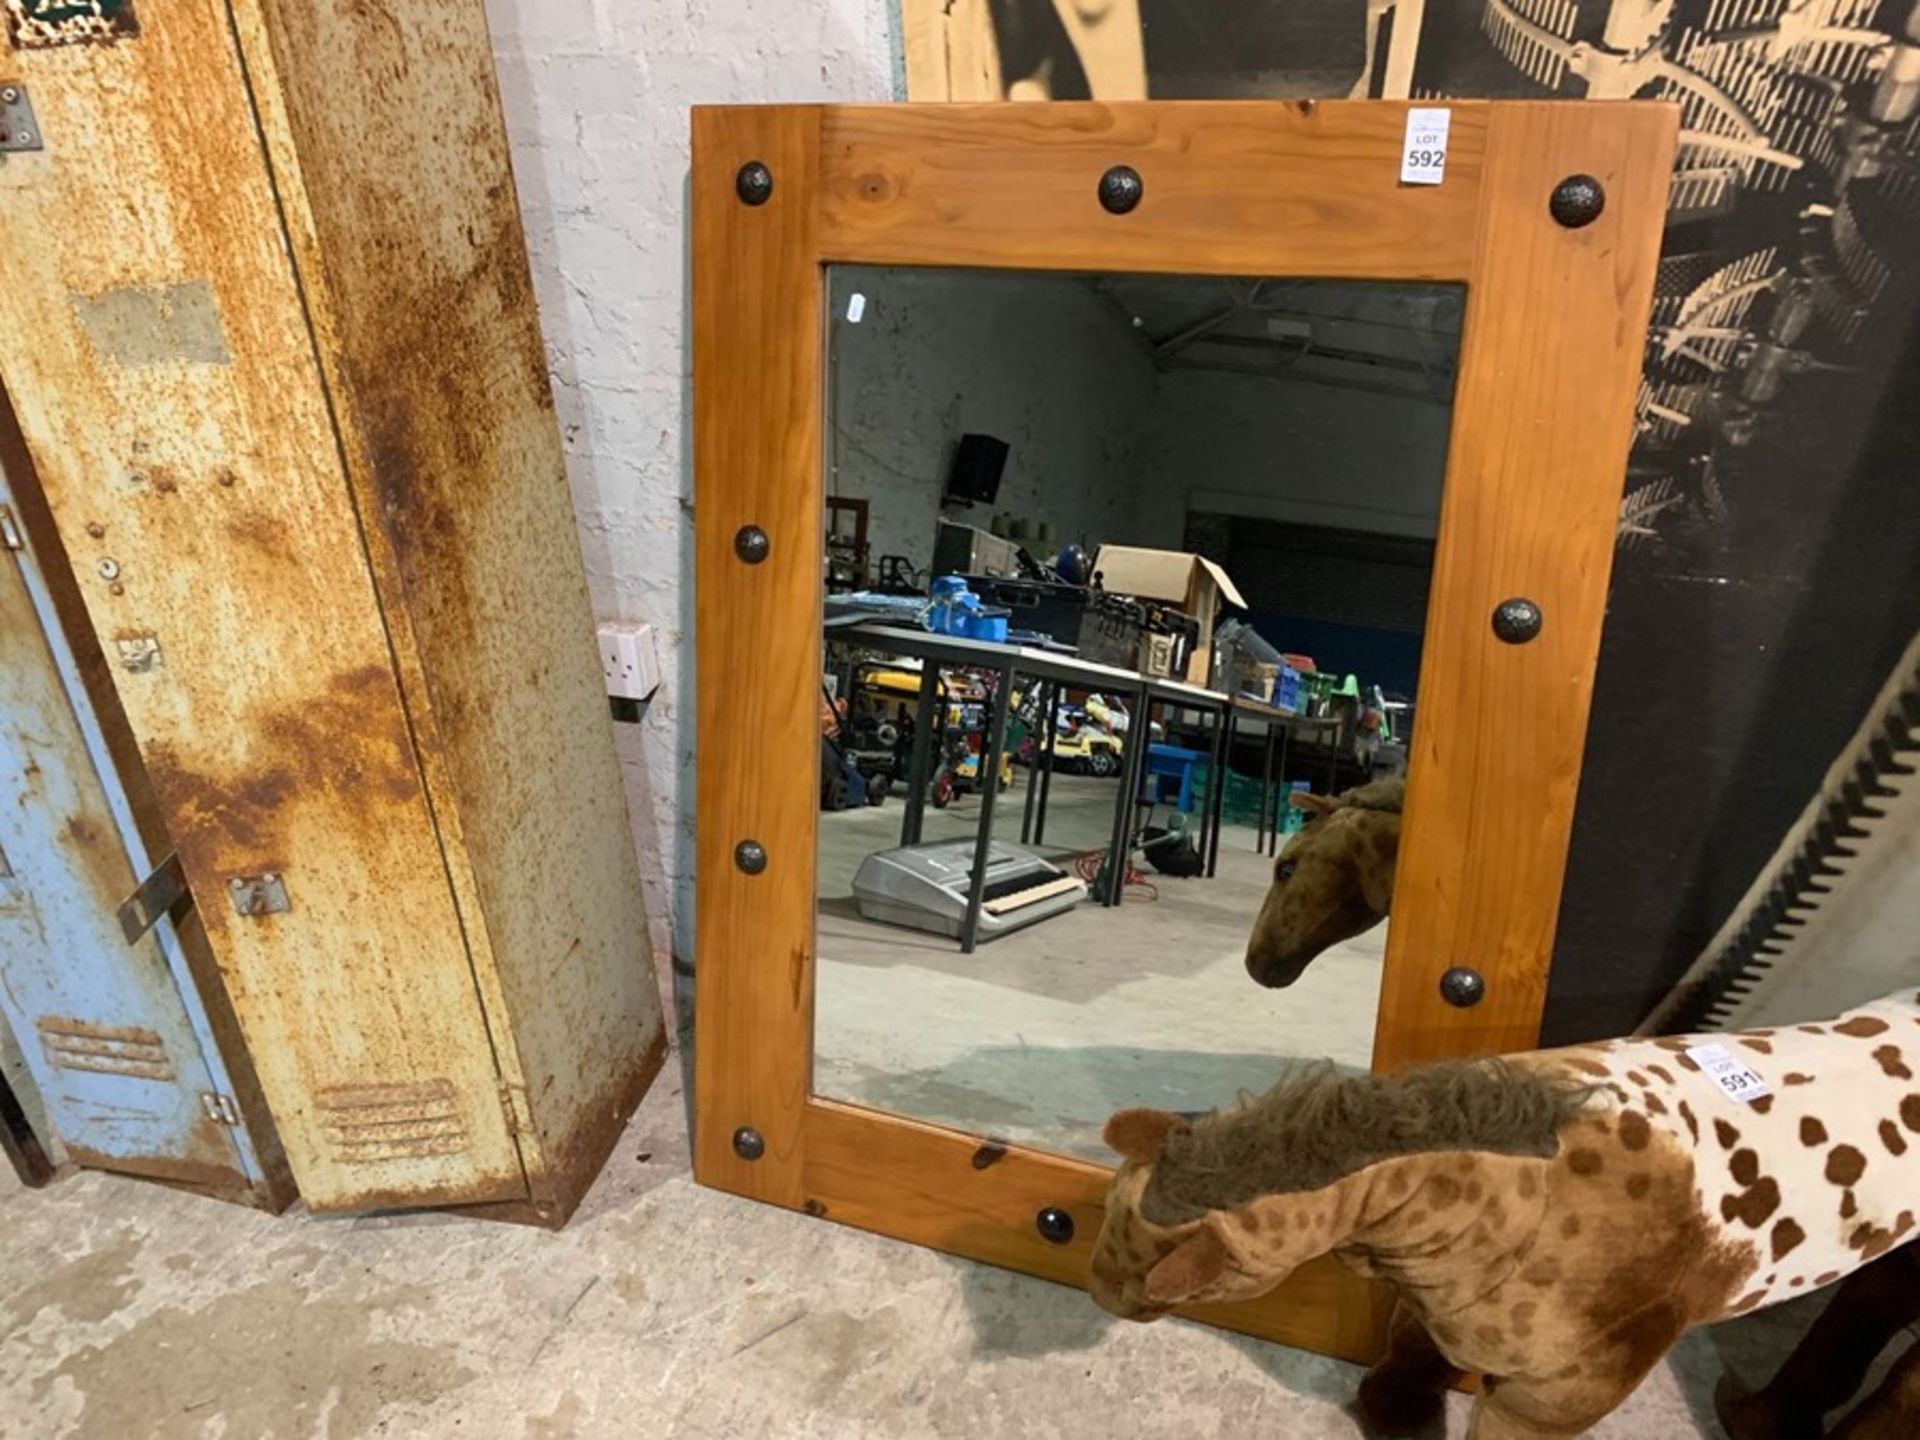 34 X 46" METAL STUDDED PINE FRAMED MIRROR - Image 3 of 3